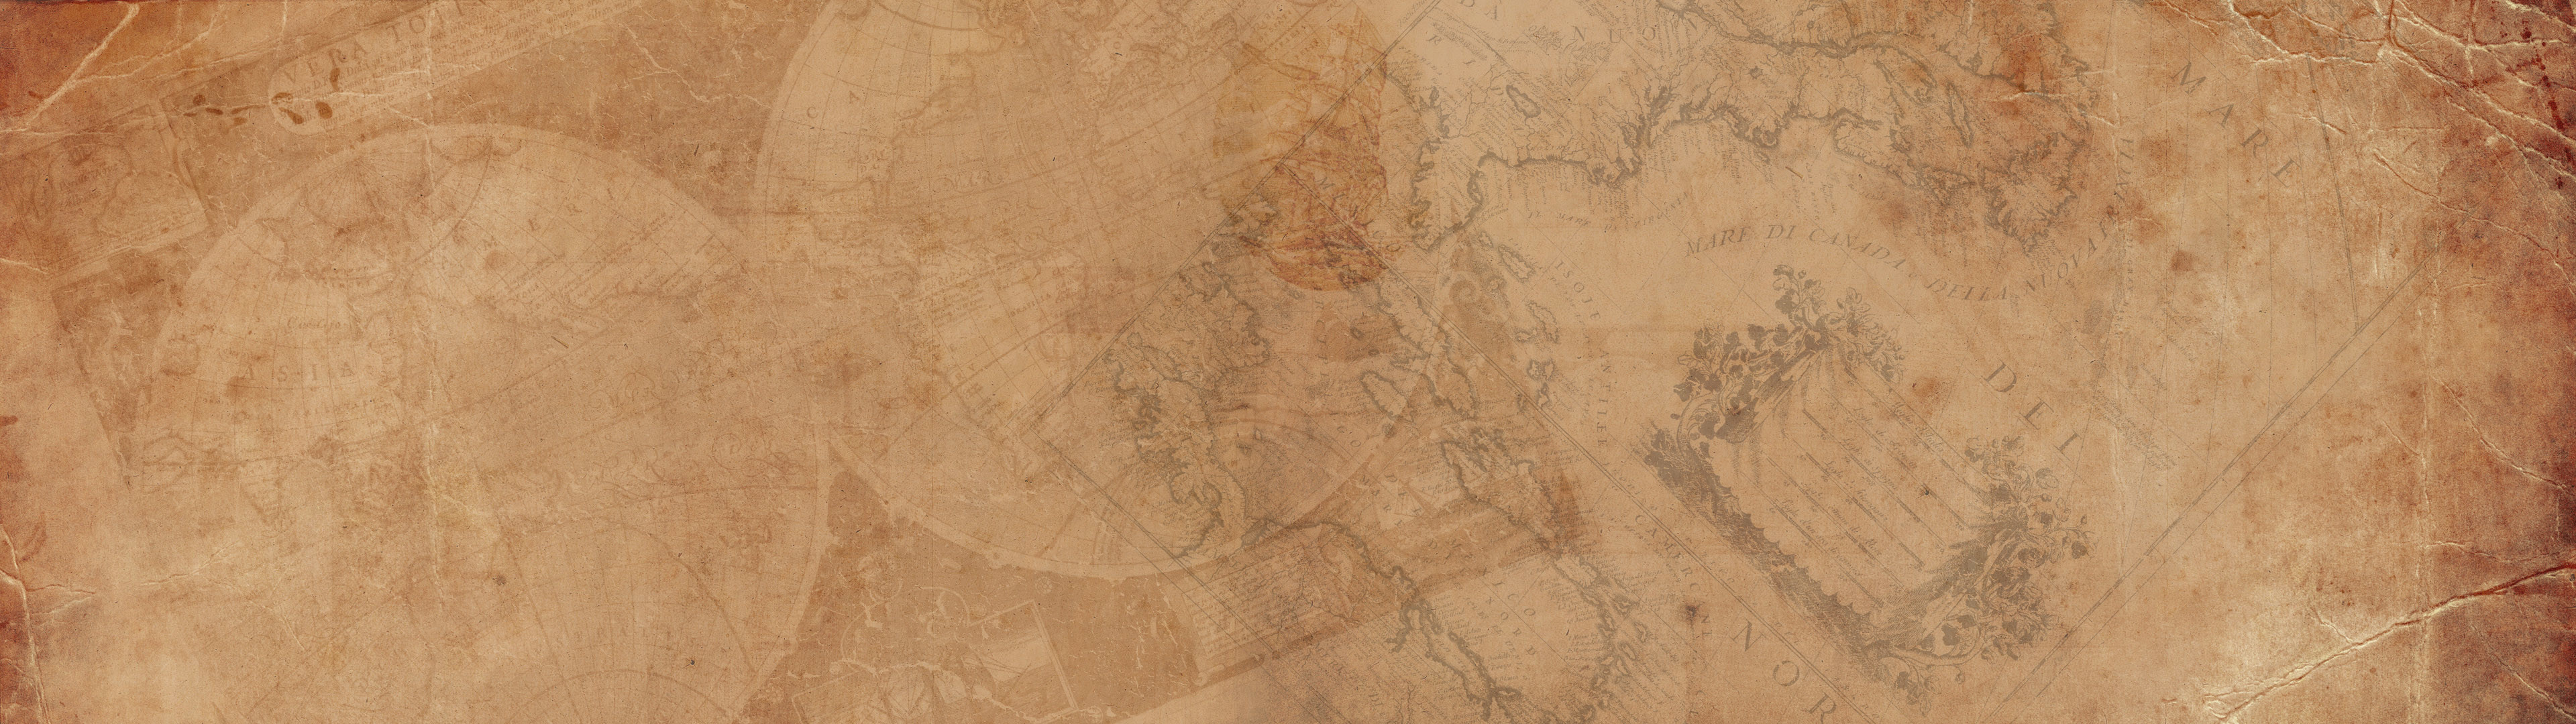 3840x1080 Old map wallpaper from Lifehacker.